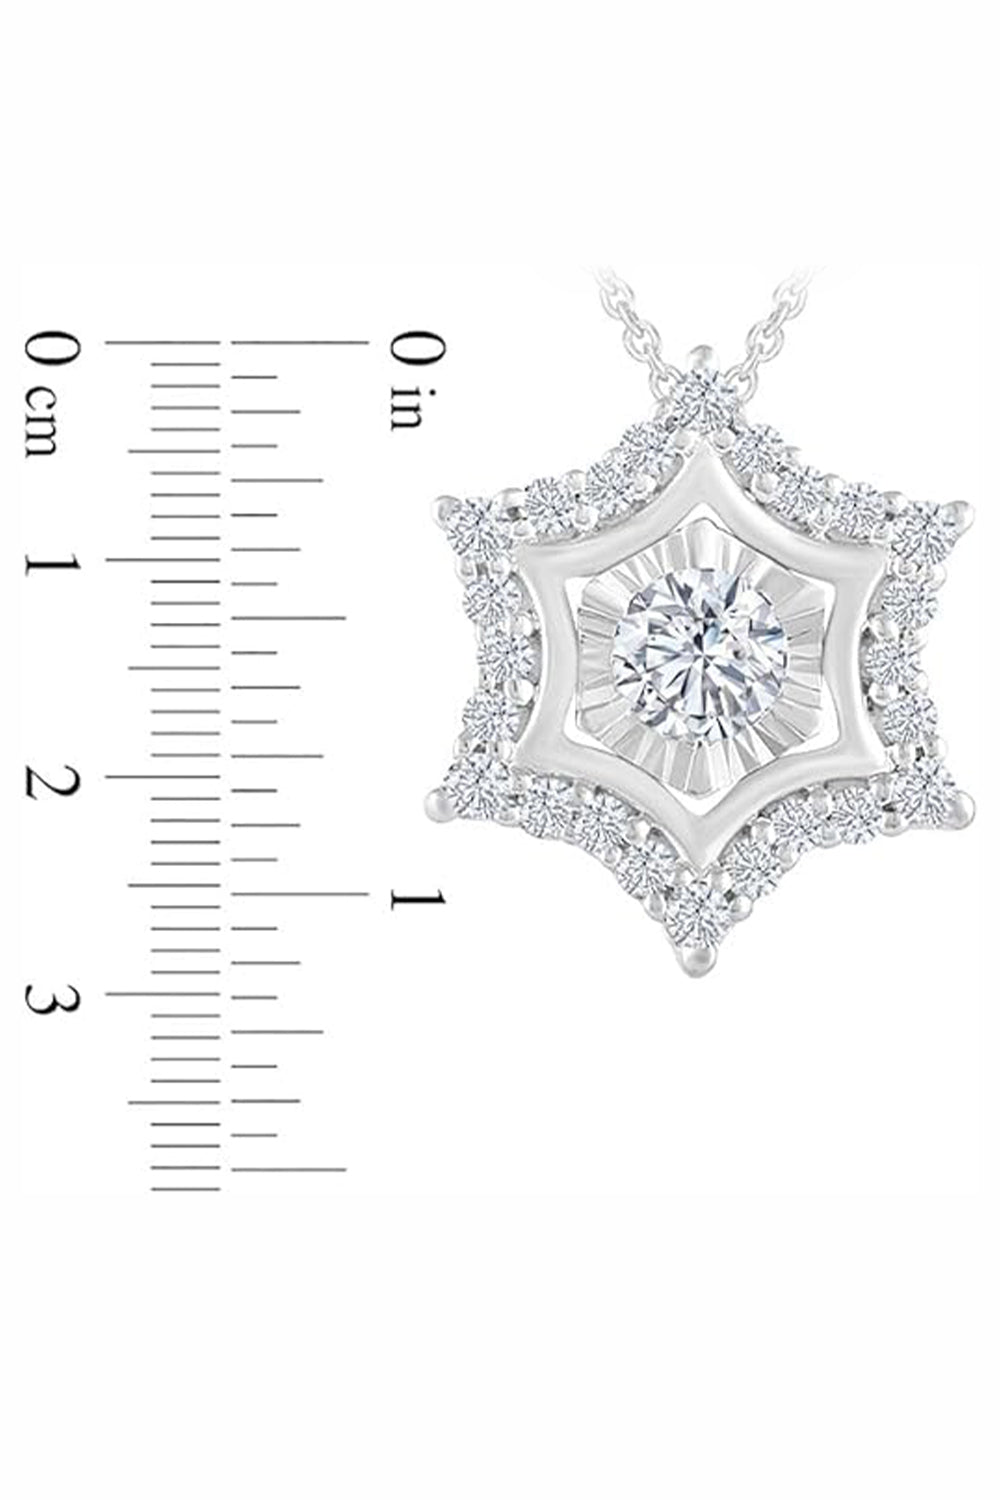 White Gold Color Yaathi Snowflake Pendant Necklace